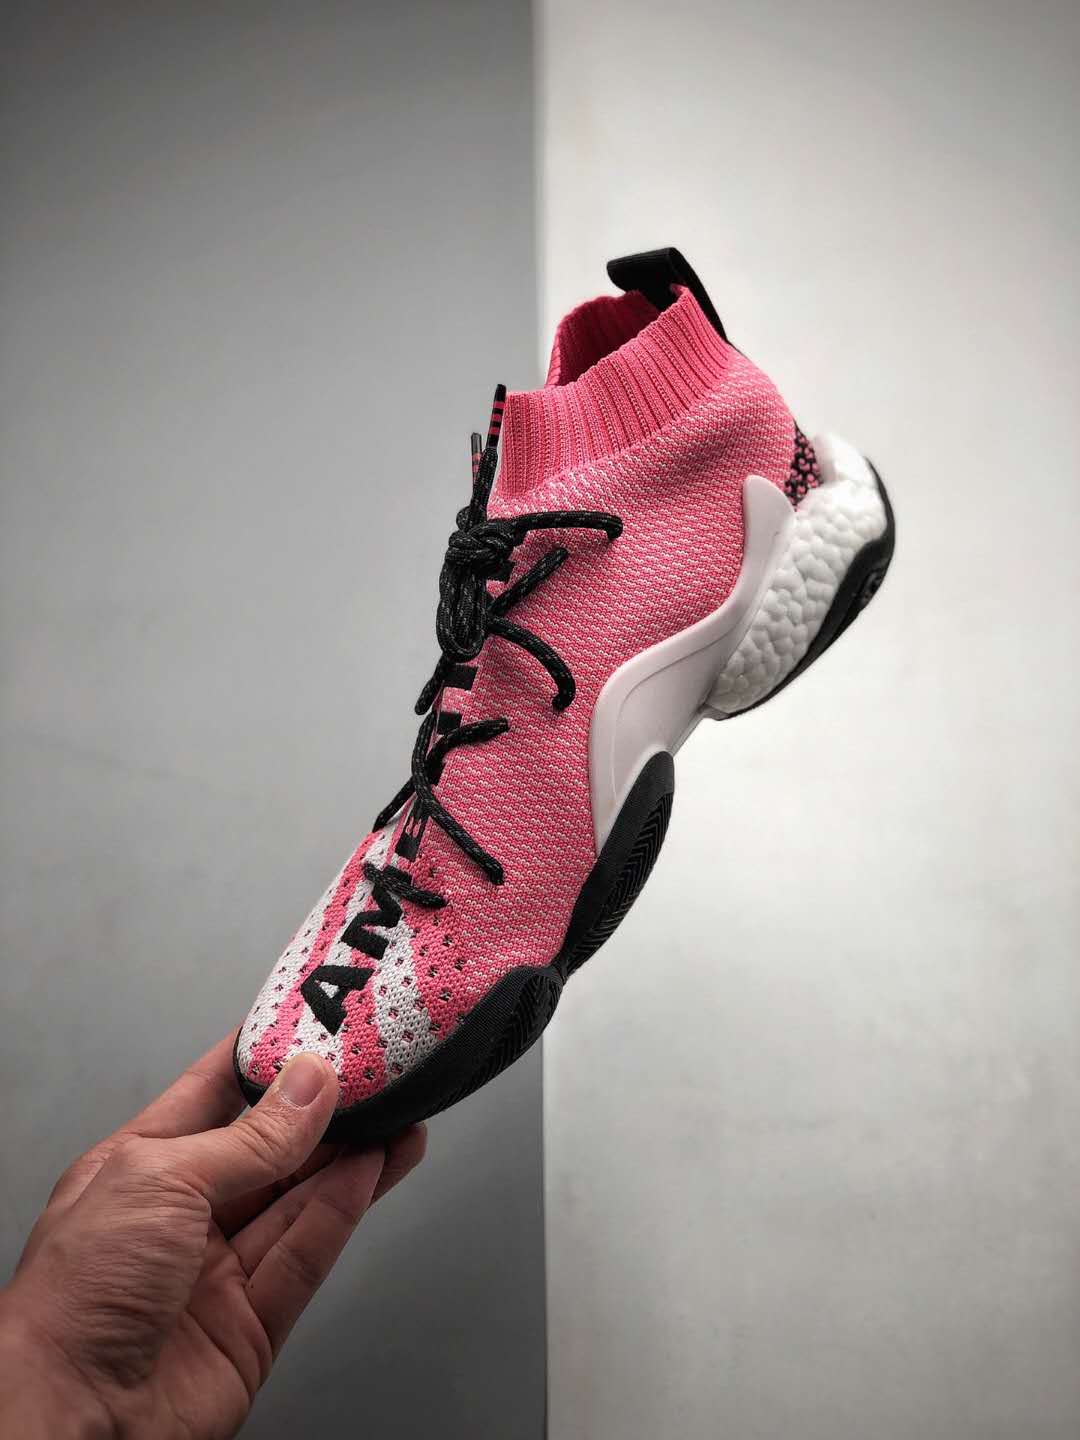 Adidas Pharrell x Crazy BYW 'Ambition' G28183 | Stylish Collaboration Sneakers